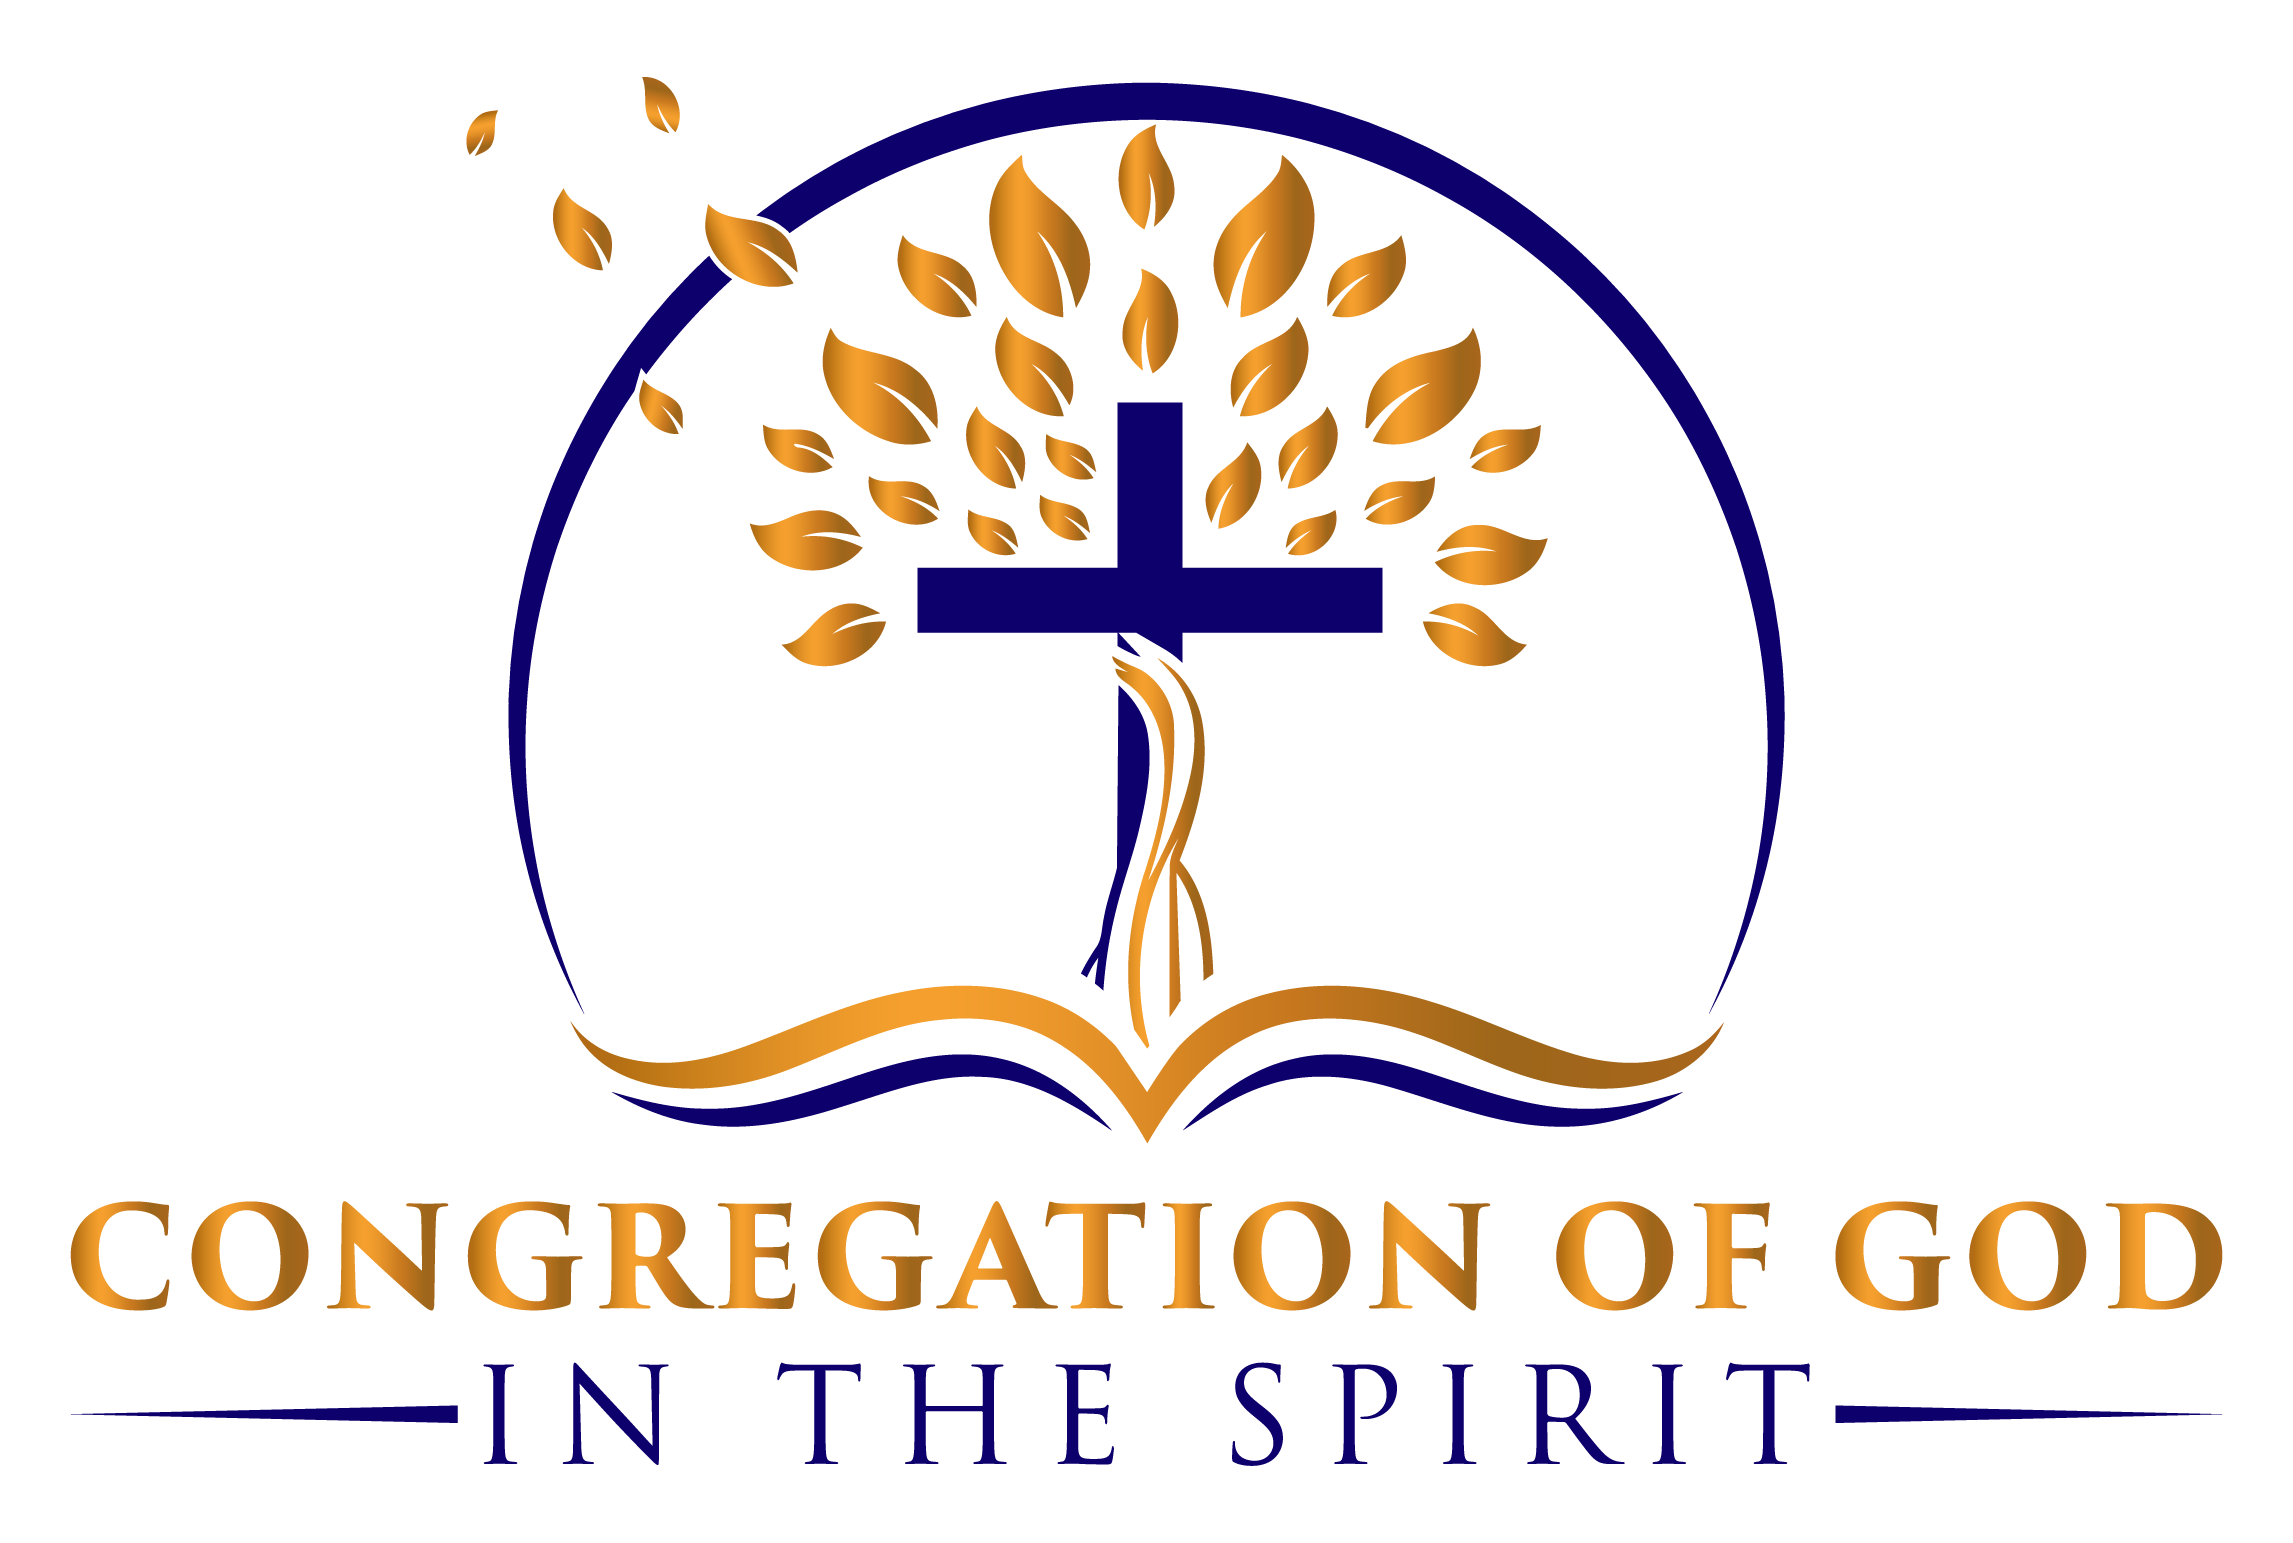 Congregation of God in the Spirit